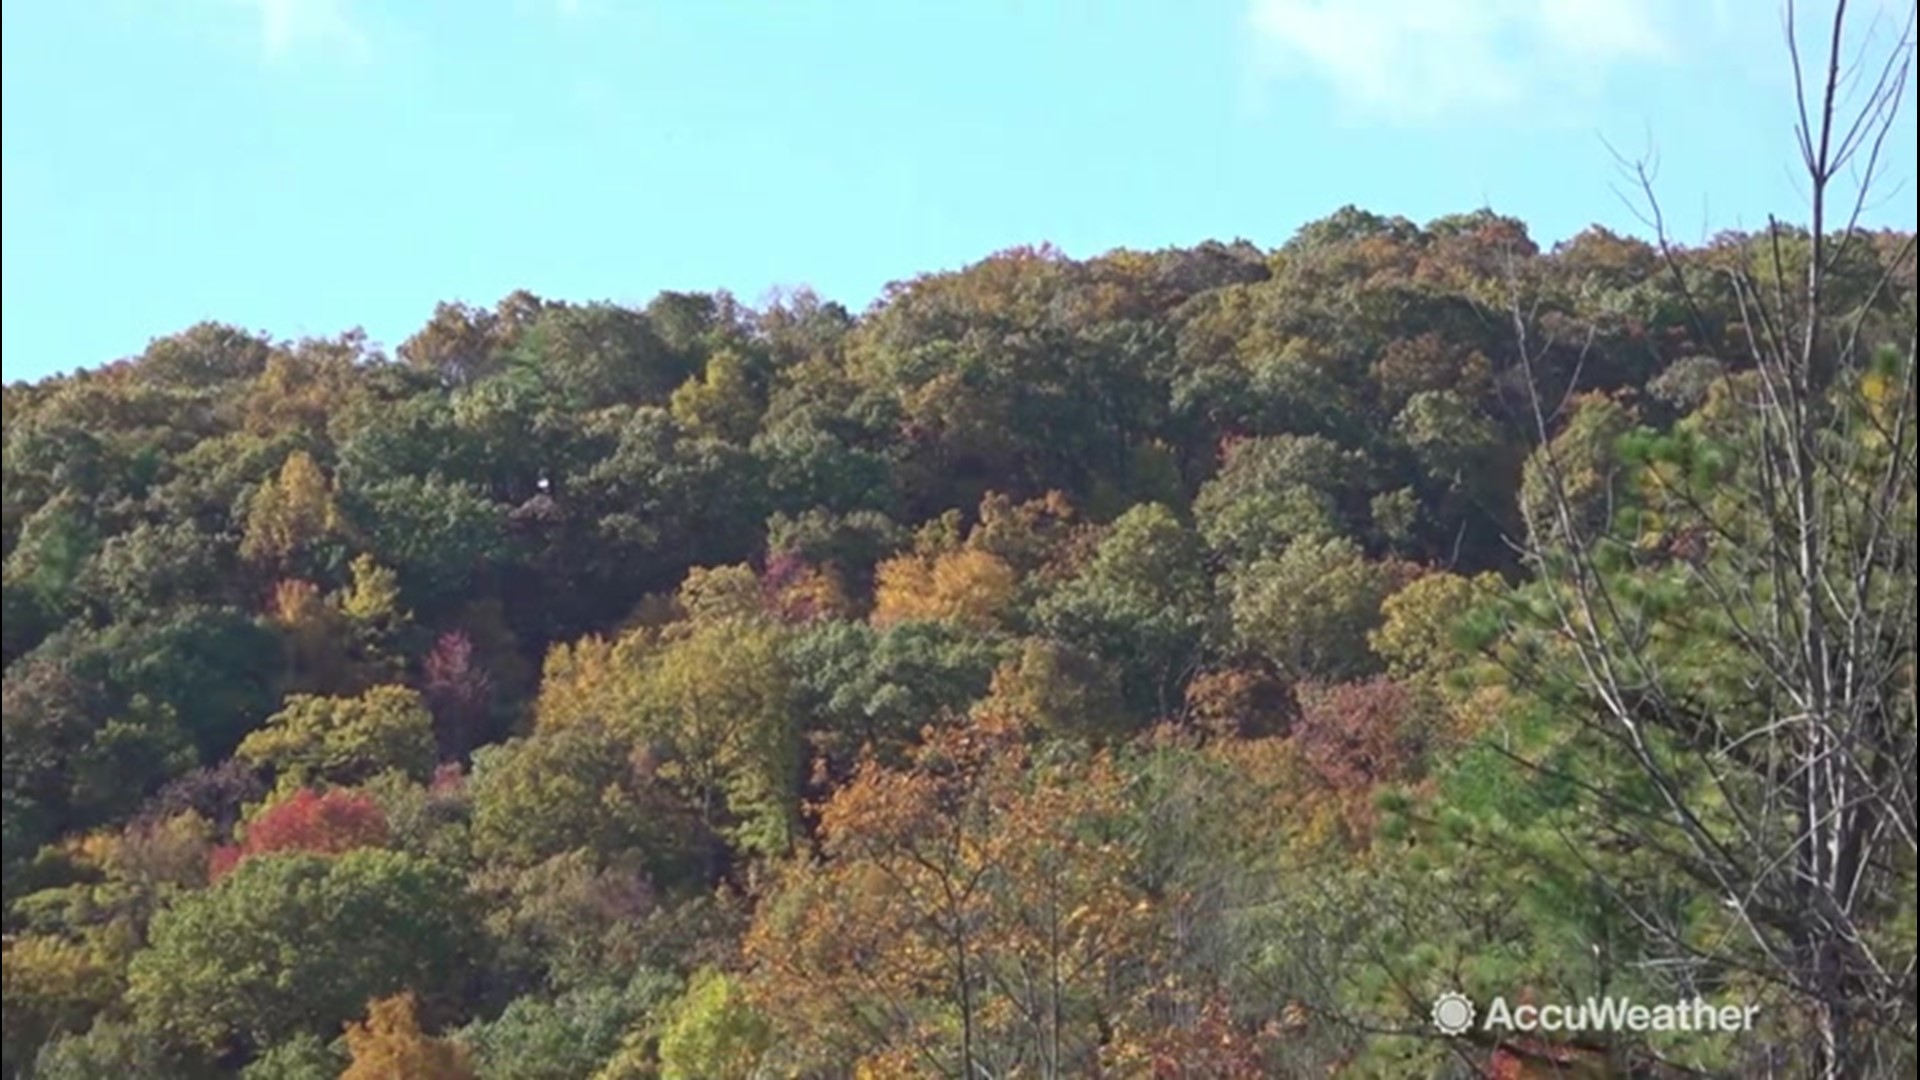 It's peak fall foliage season for the northeast. But do you know how and why the leaves change colors?